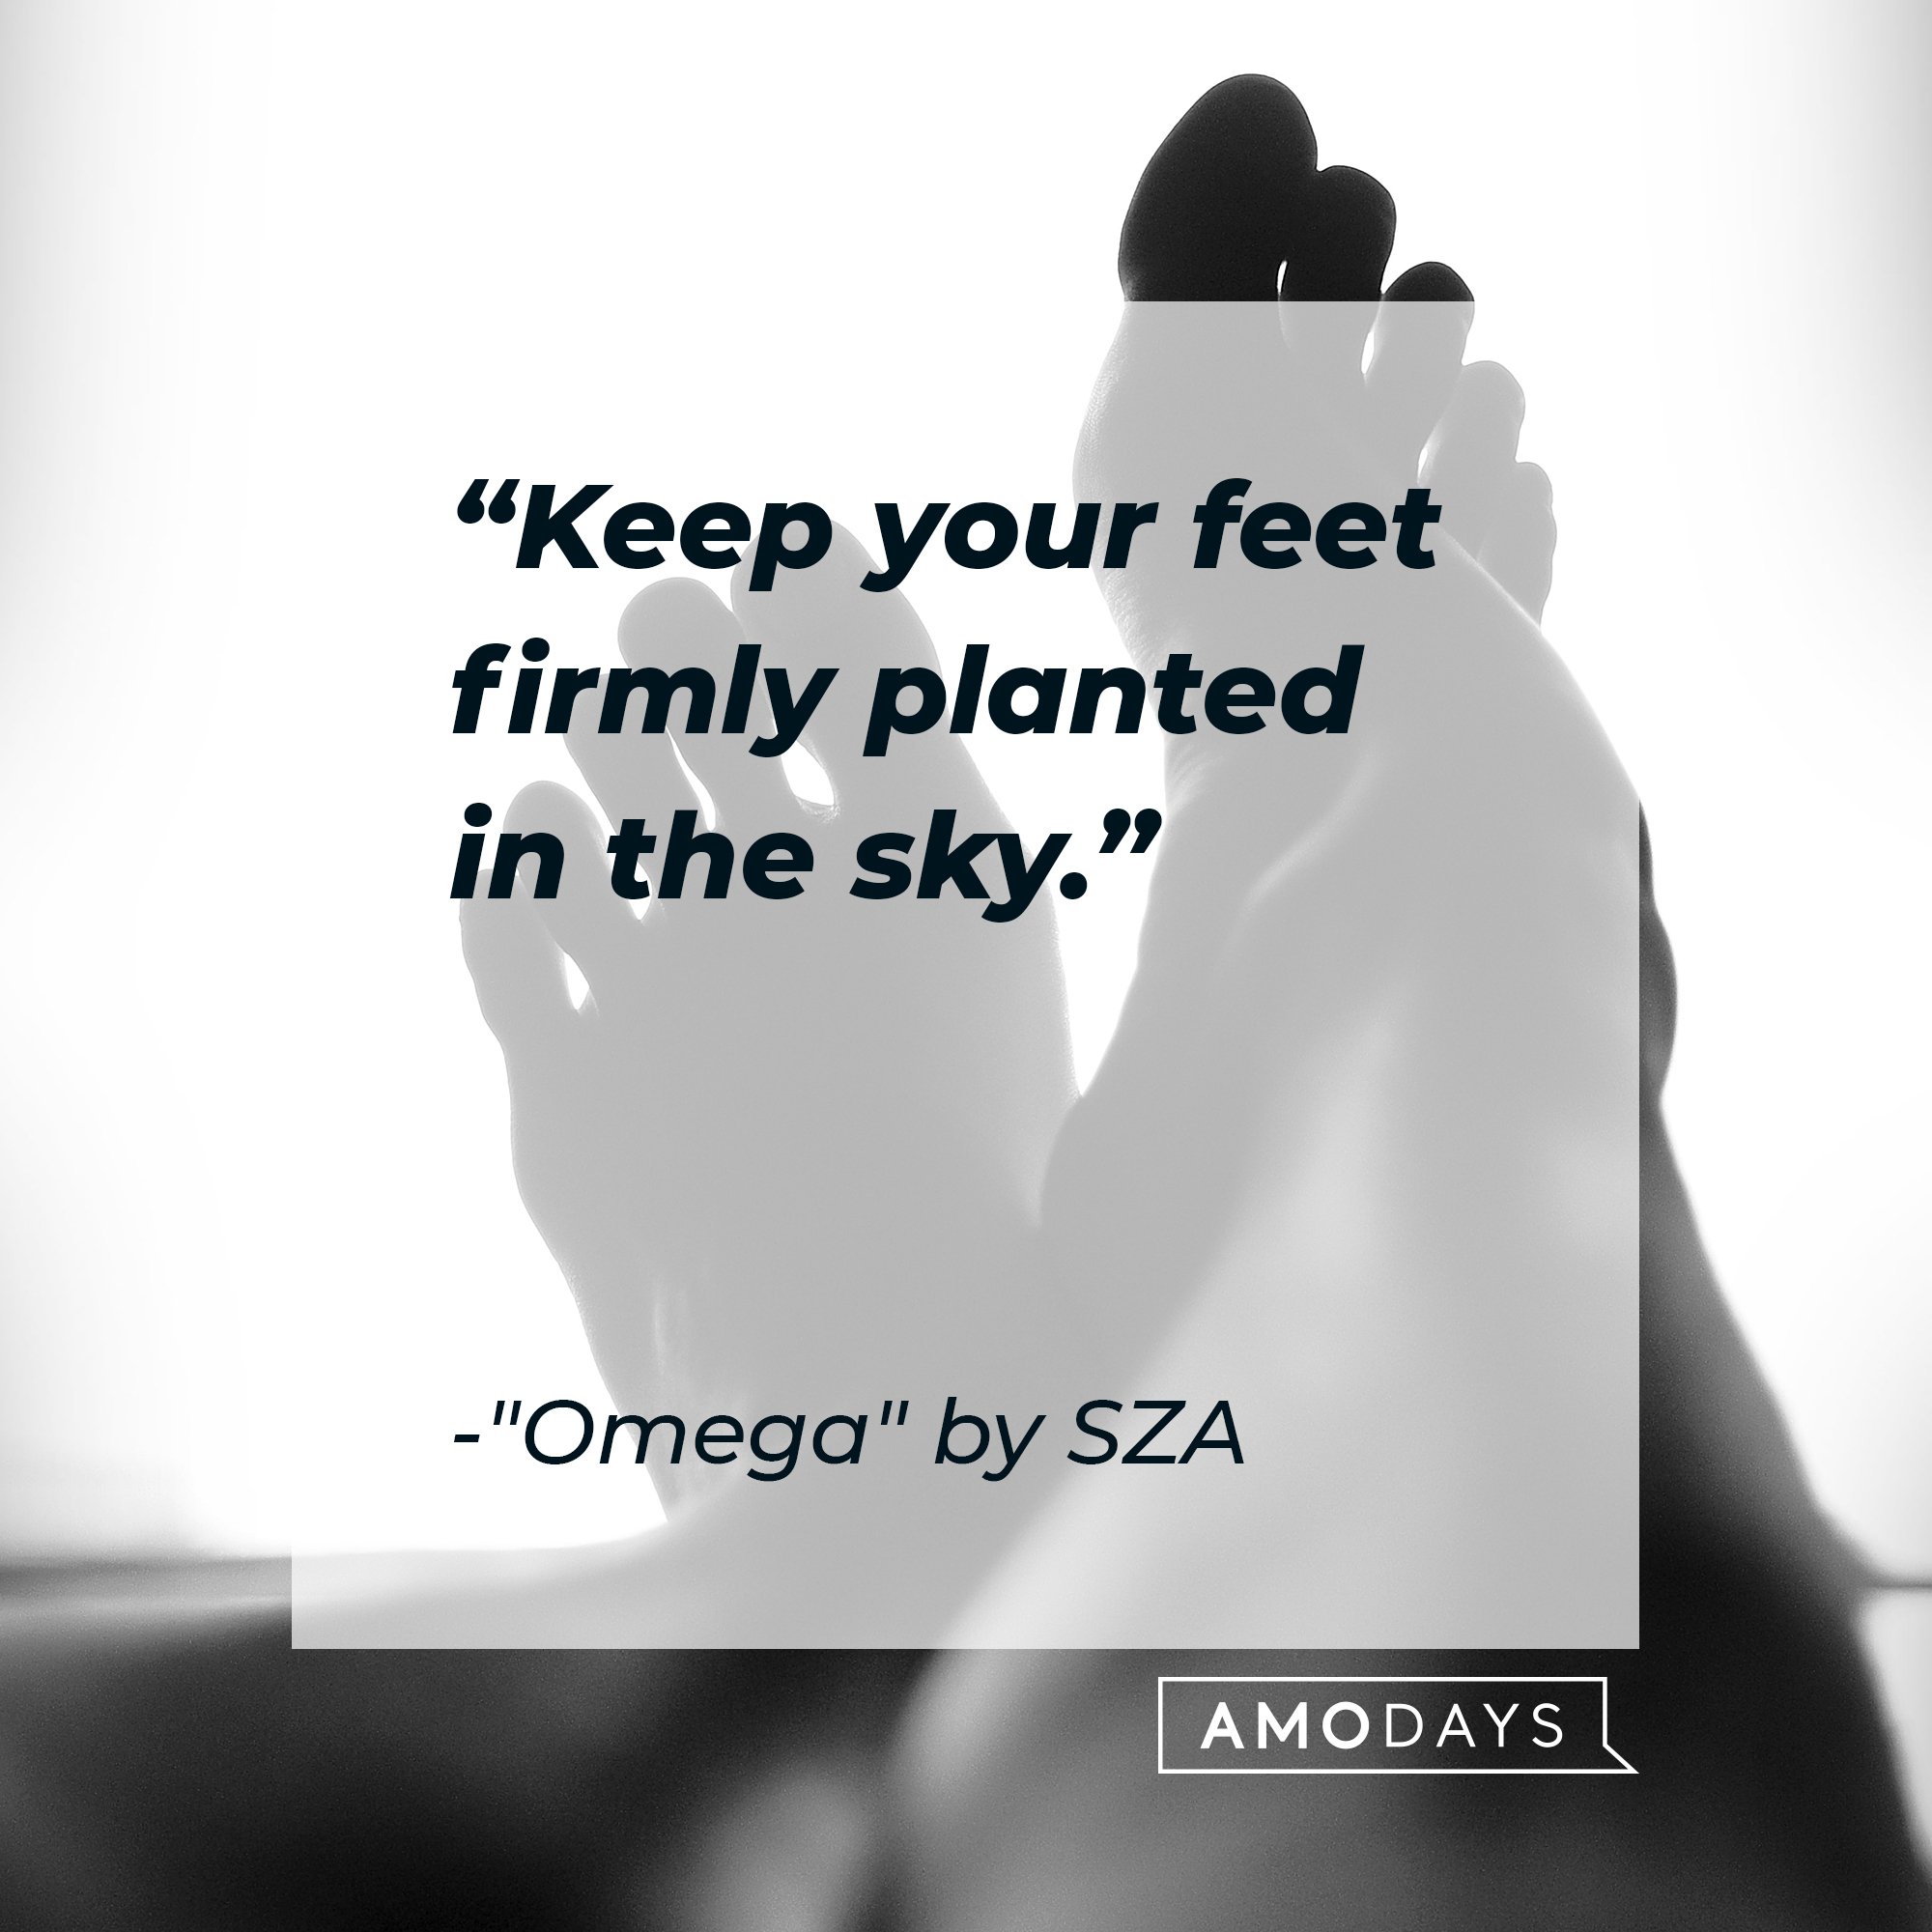 SZA’s quote: "Keep your feet firmly planted in the sky." | Image: AmoDays